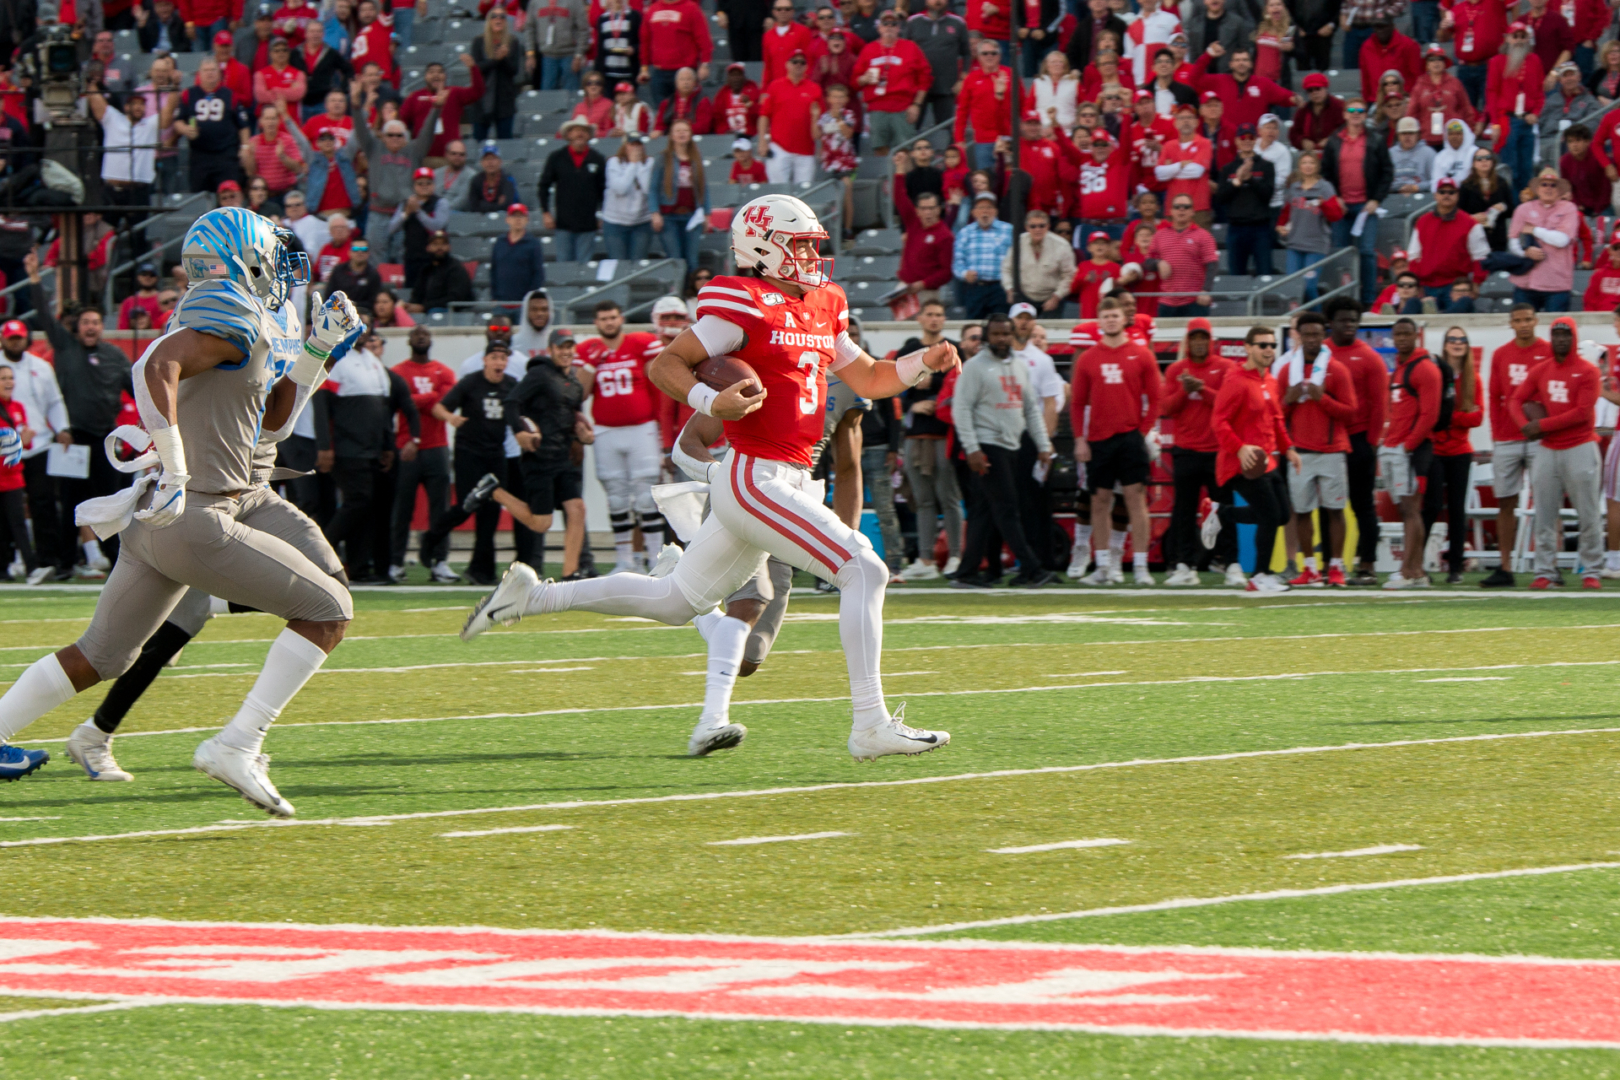 Sophomore quarterback Clayton Tune threw for X yards and rushed for another X in X attempts, including a 68-yard touchdown run in the first quarter of Houston's X-X win/loss to No. 18 Memphis on Saturday at TDECU Stadium. | Katrina Martinez/The Cougar